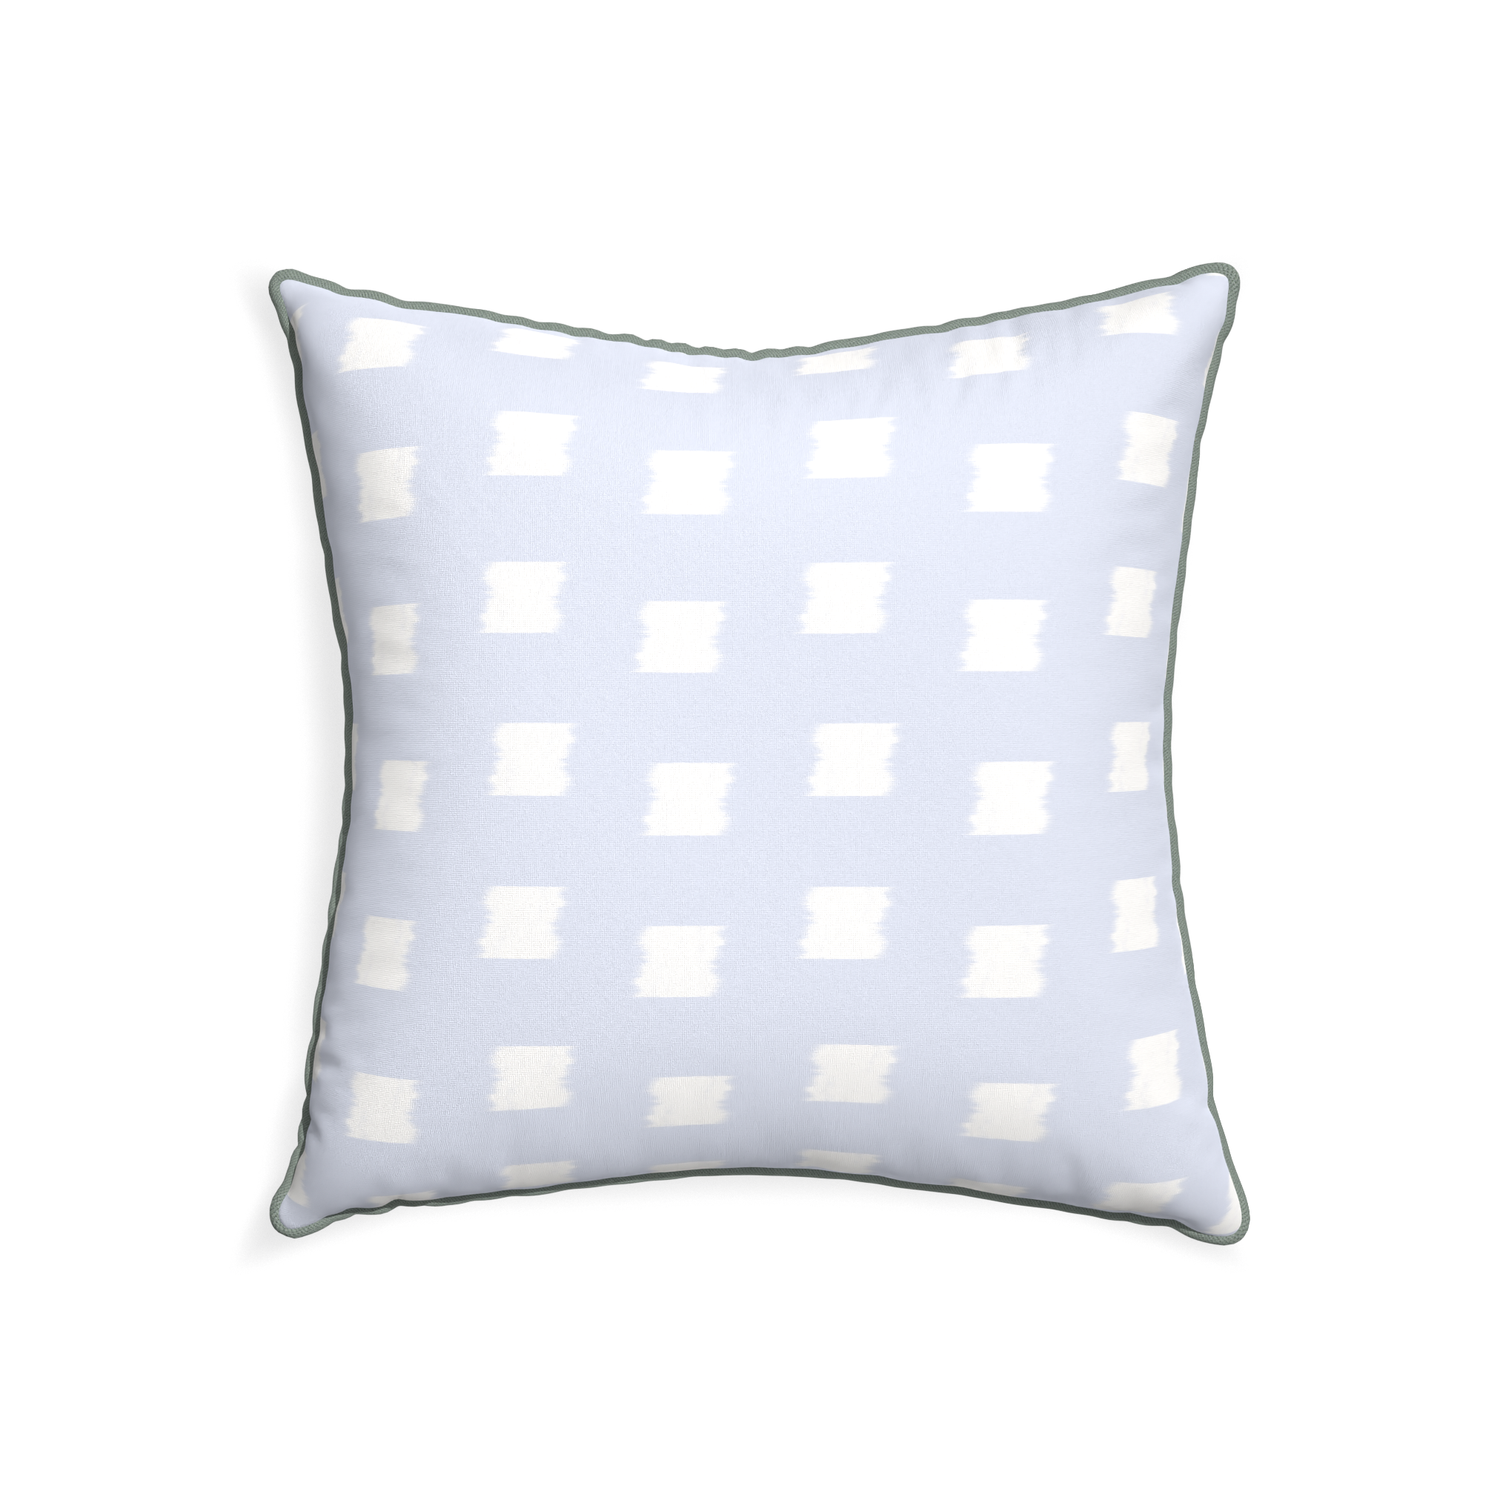 22-square denton custom sky blue patternpillow with sage piping on white background